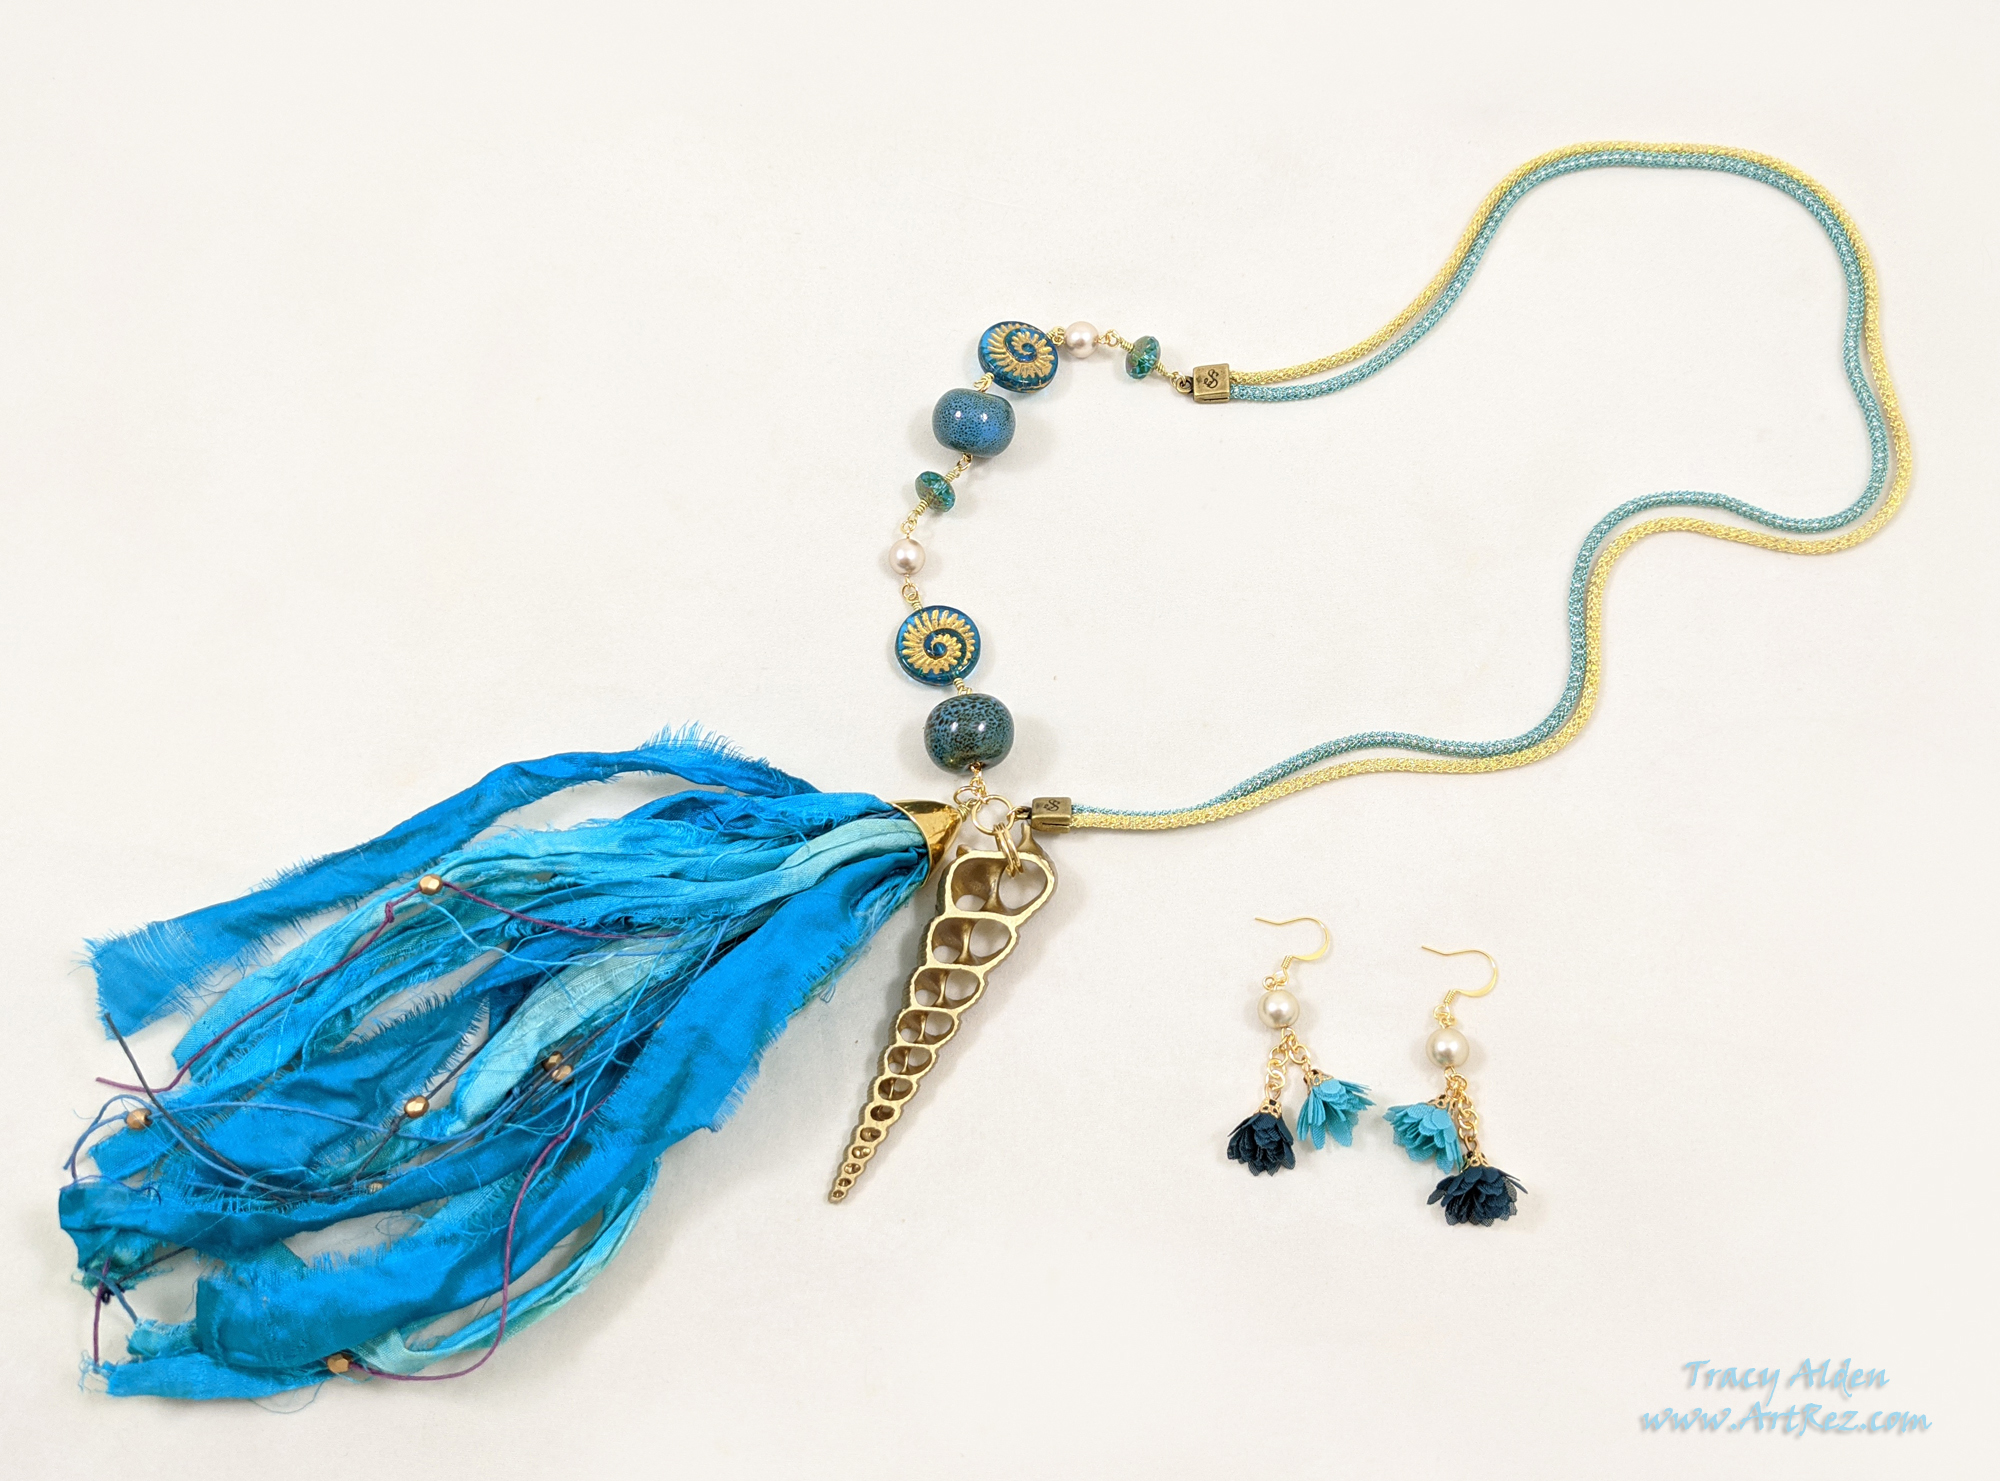 SilverSilk necklace and earring set in gold and teal tones